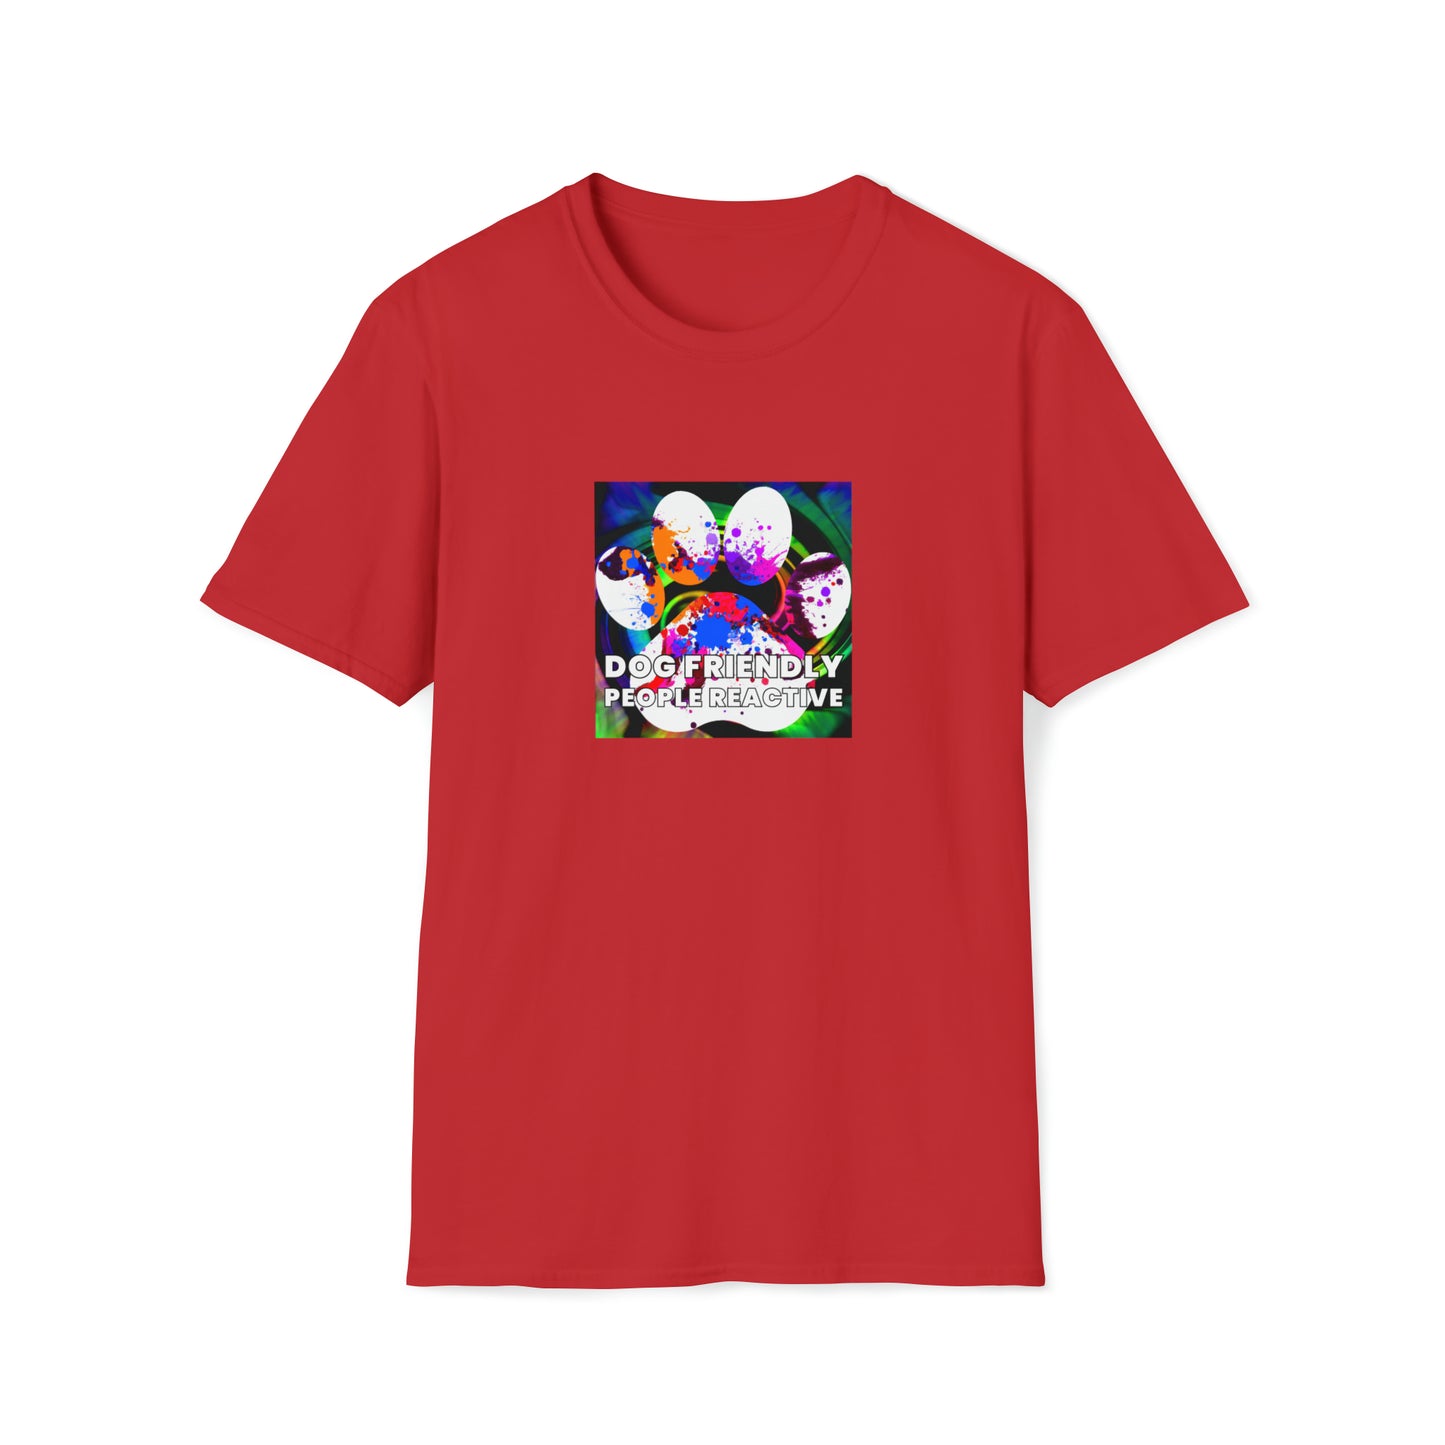 90s Street Apparel by Antoine - "Dog Friendly, People Reactive" (colored swirl) Unisex Tee